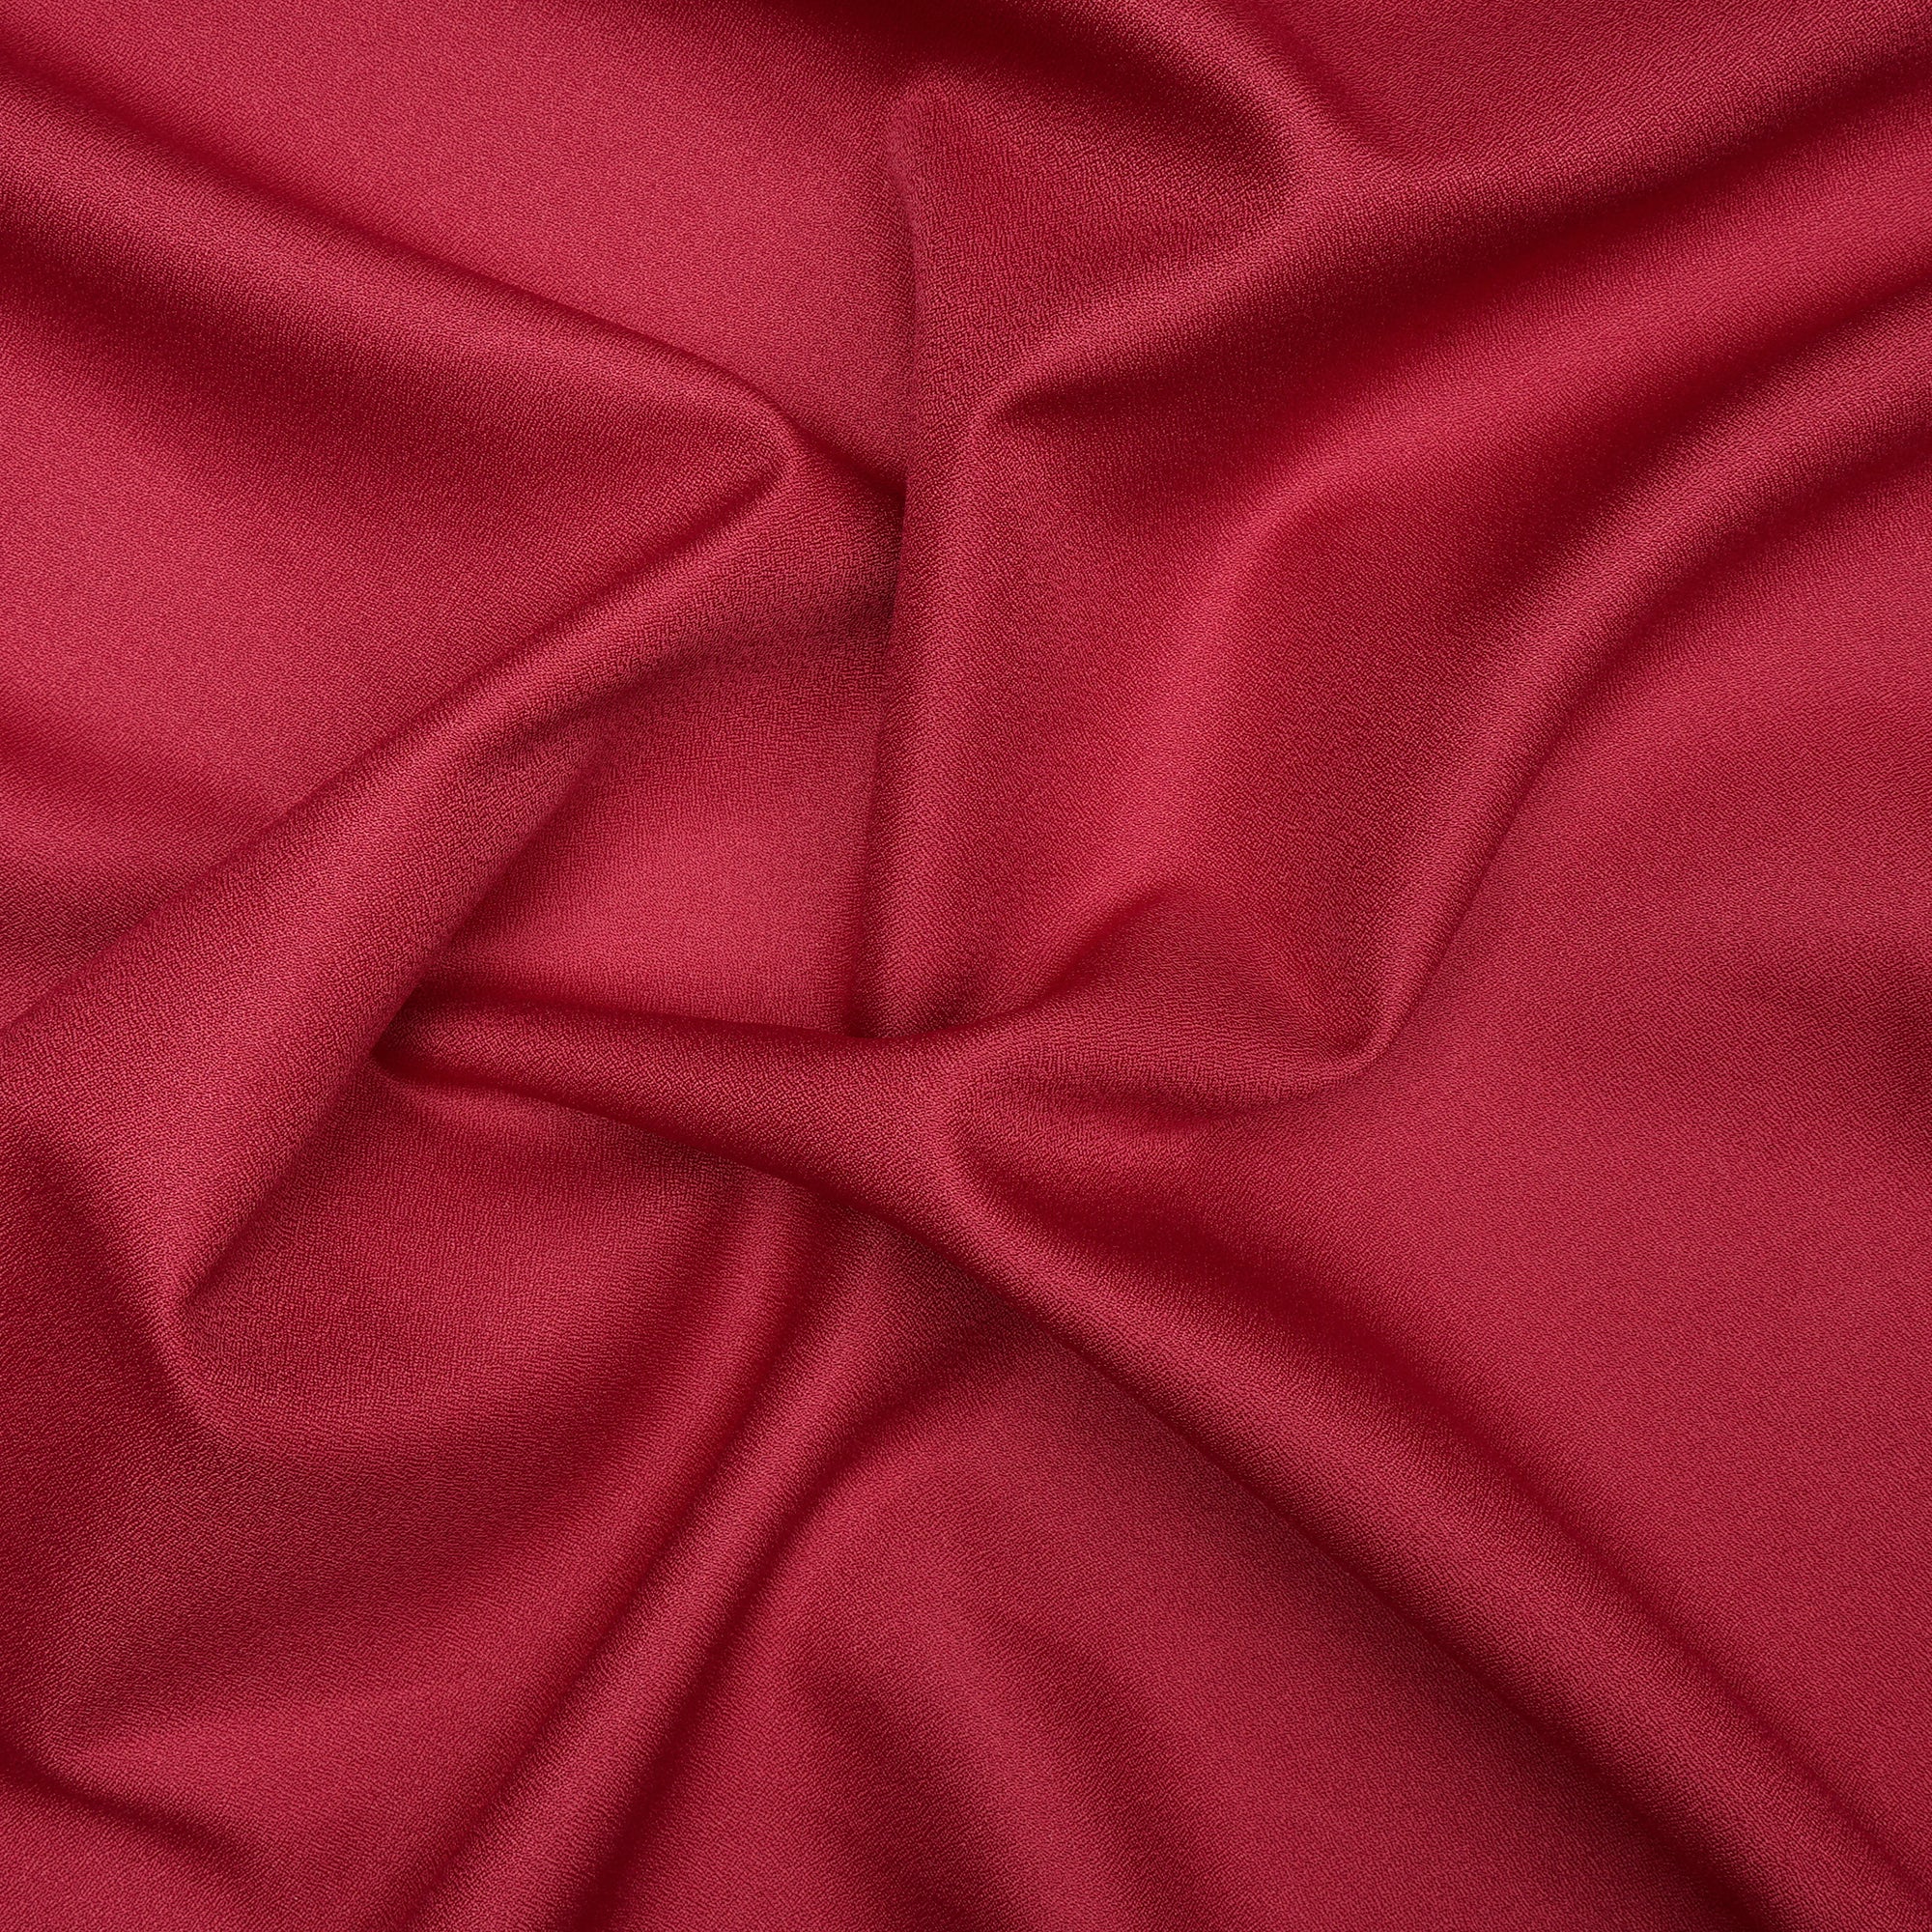 Maroon Solid Dyed Imported Amazon Moss Crepe Fabric (60" Width)